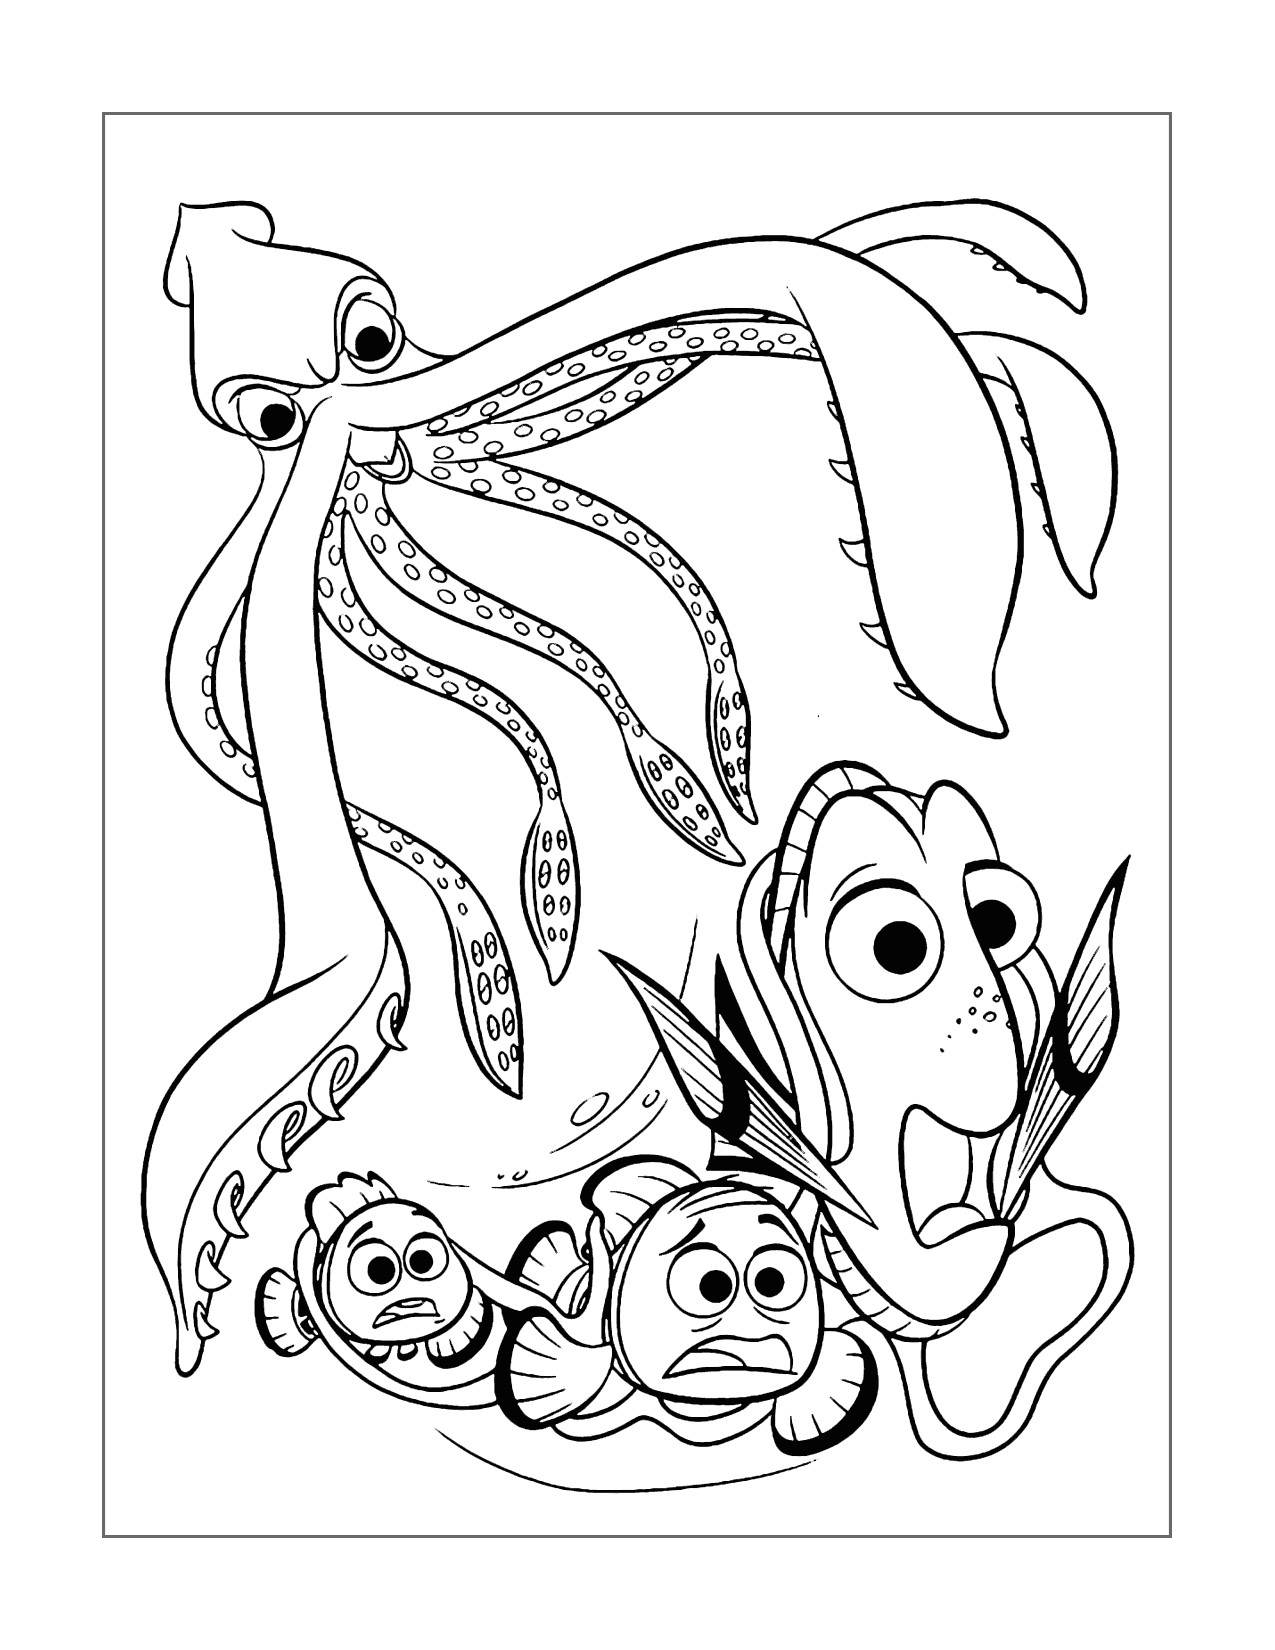 Finding Dory Coloring Page